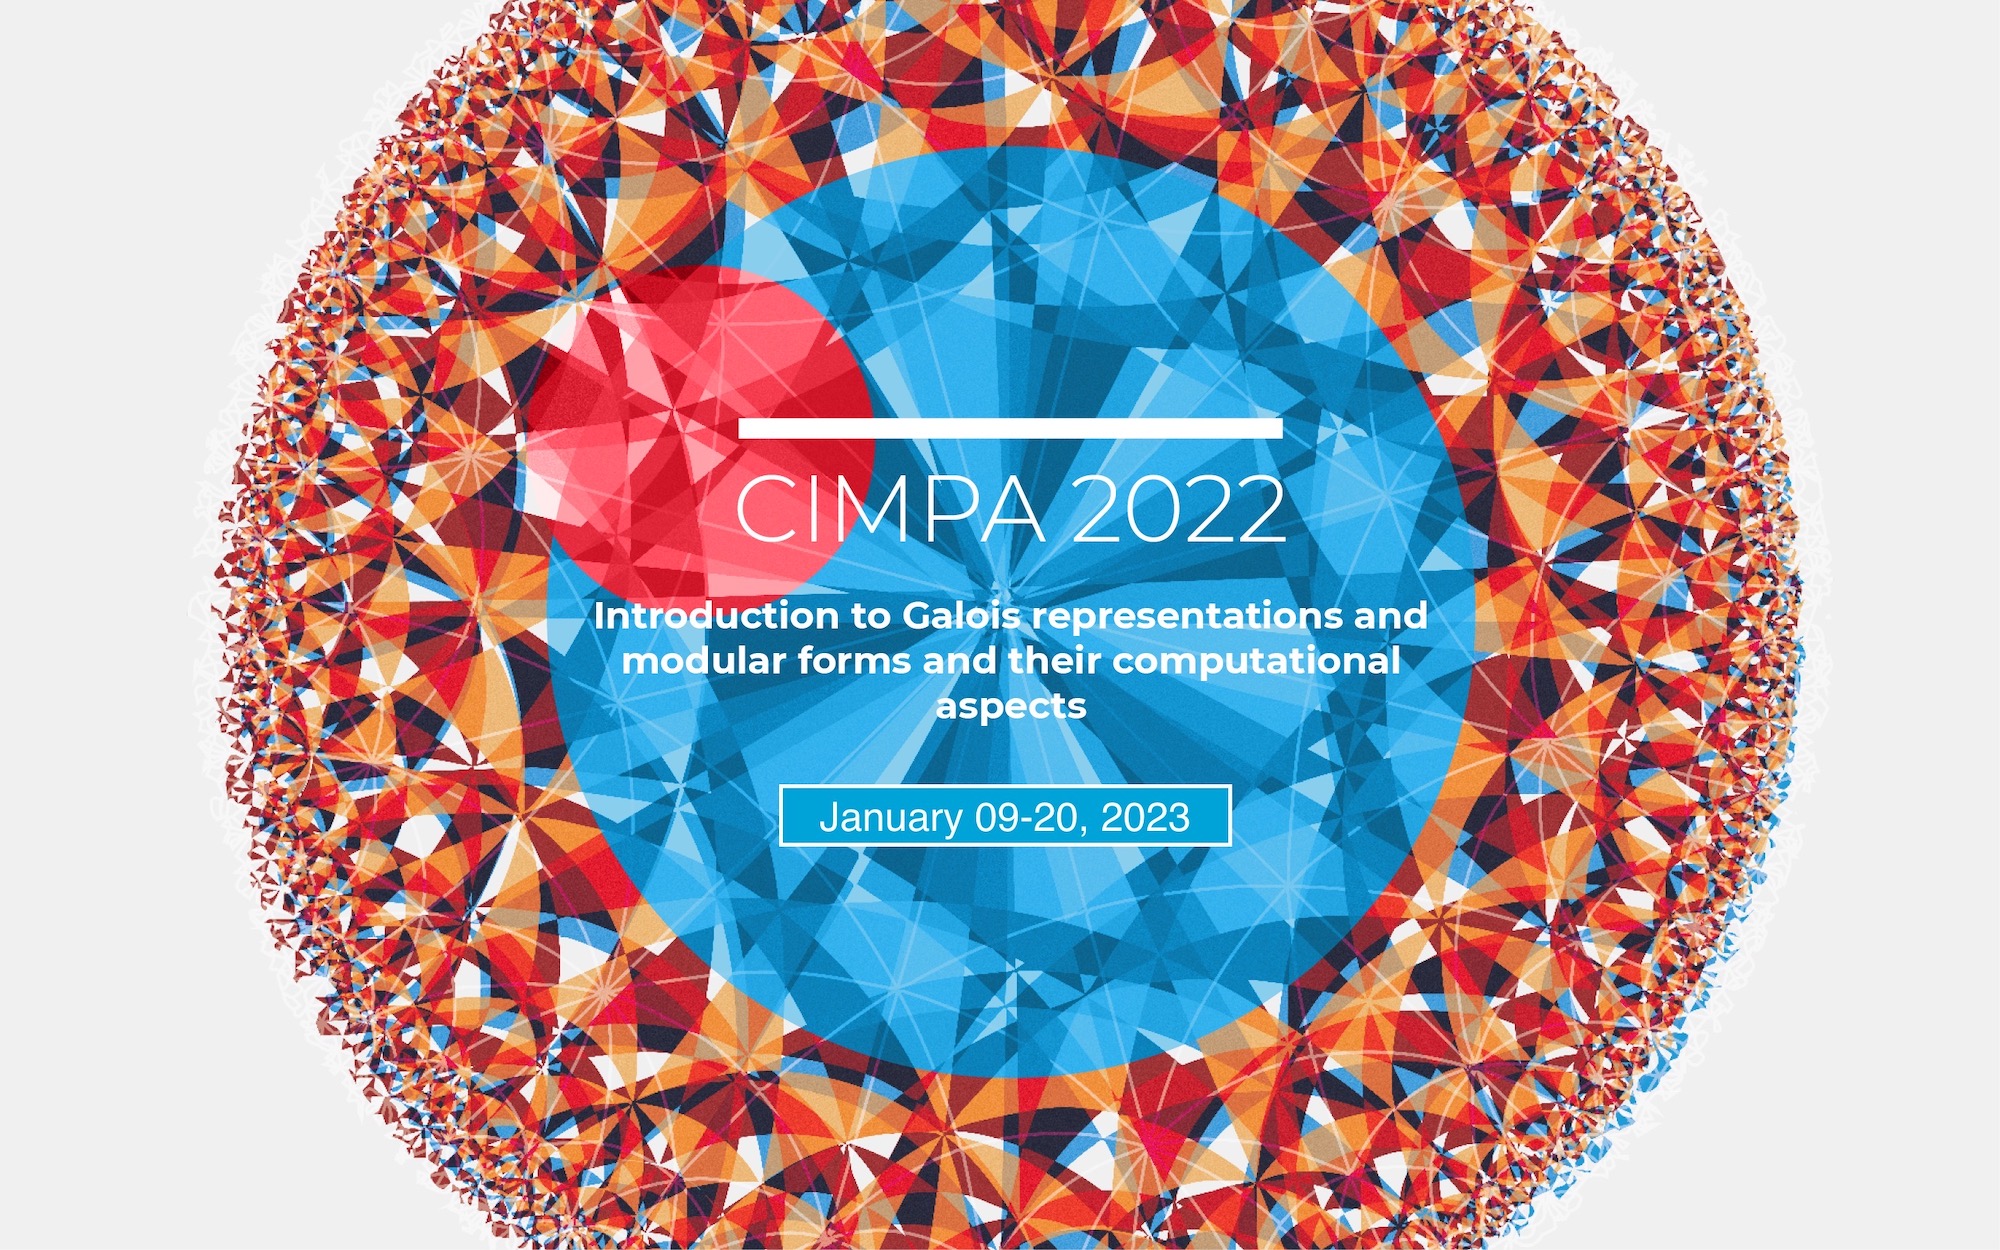 CIMPA Research School on Galois Representations and Modular Forms